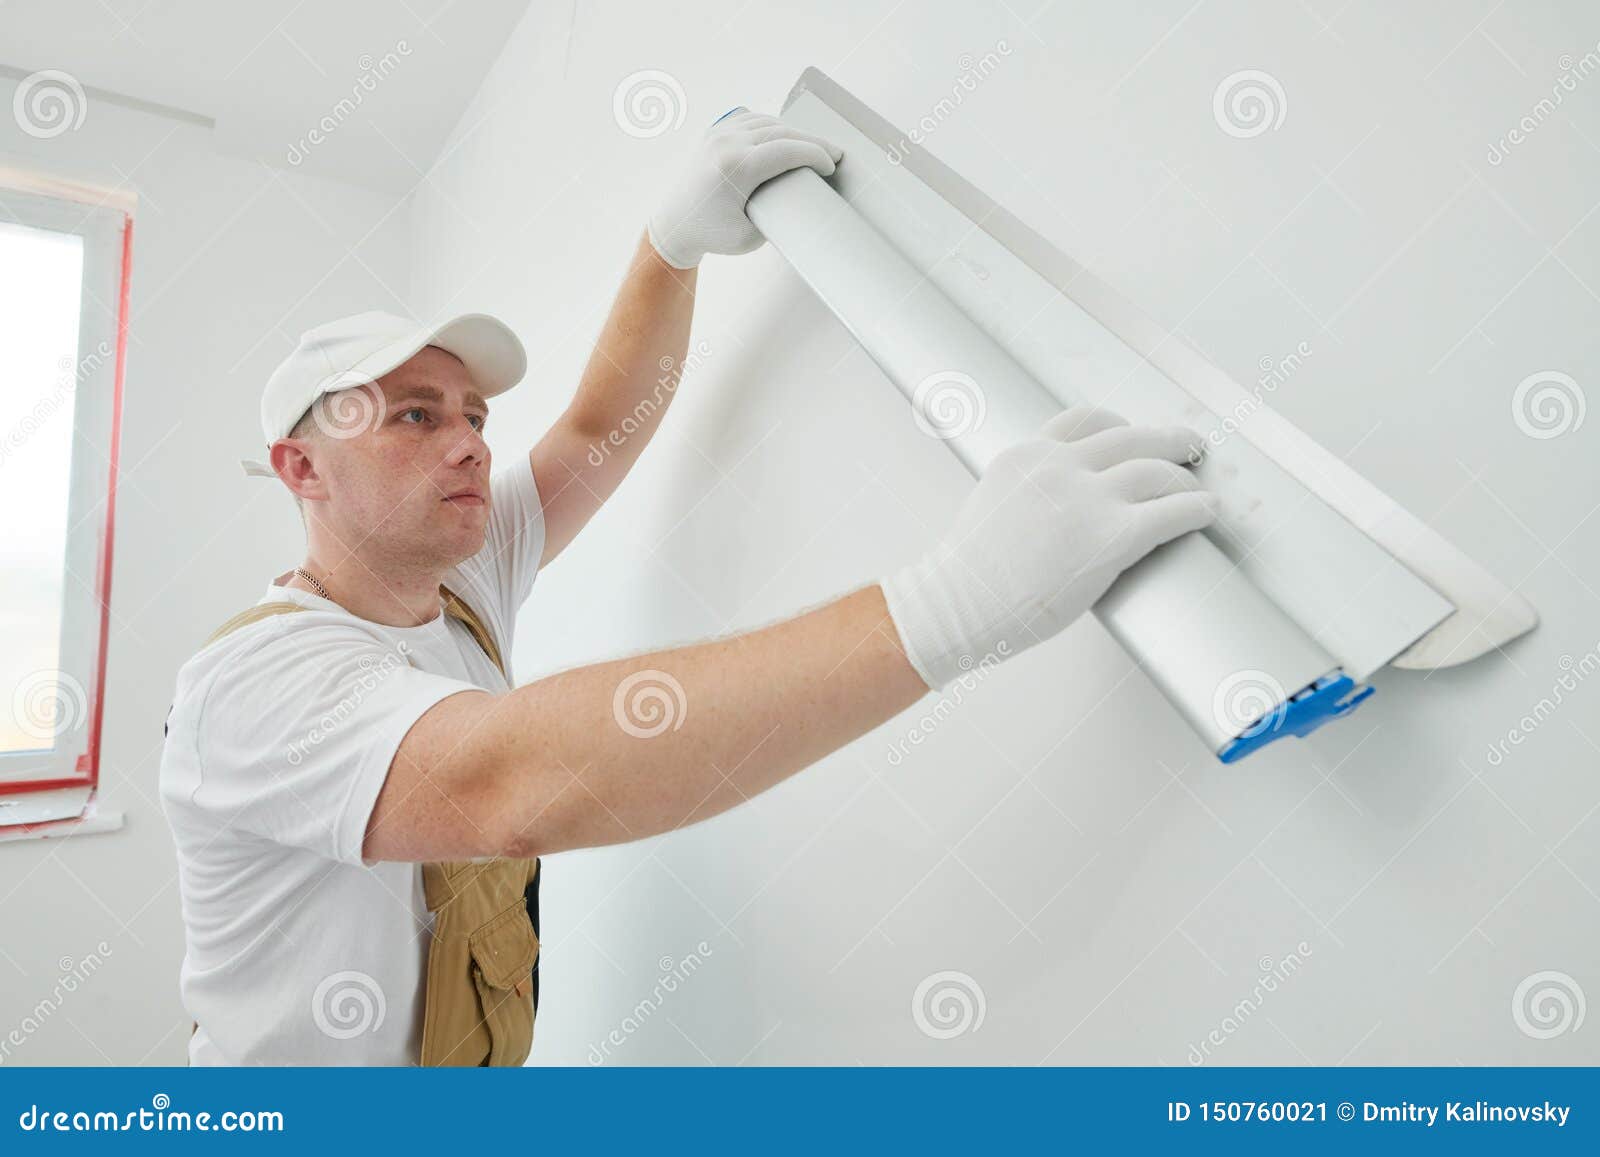 painter with putty knife. plasterer smoothing wall surface at home renewal